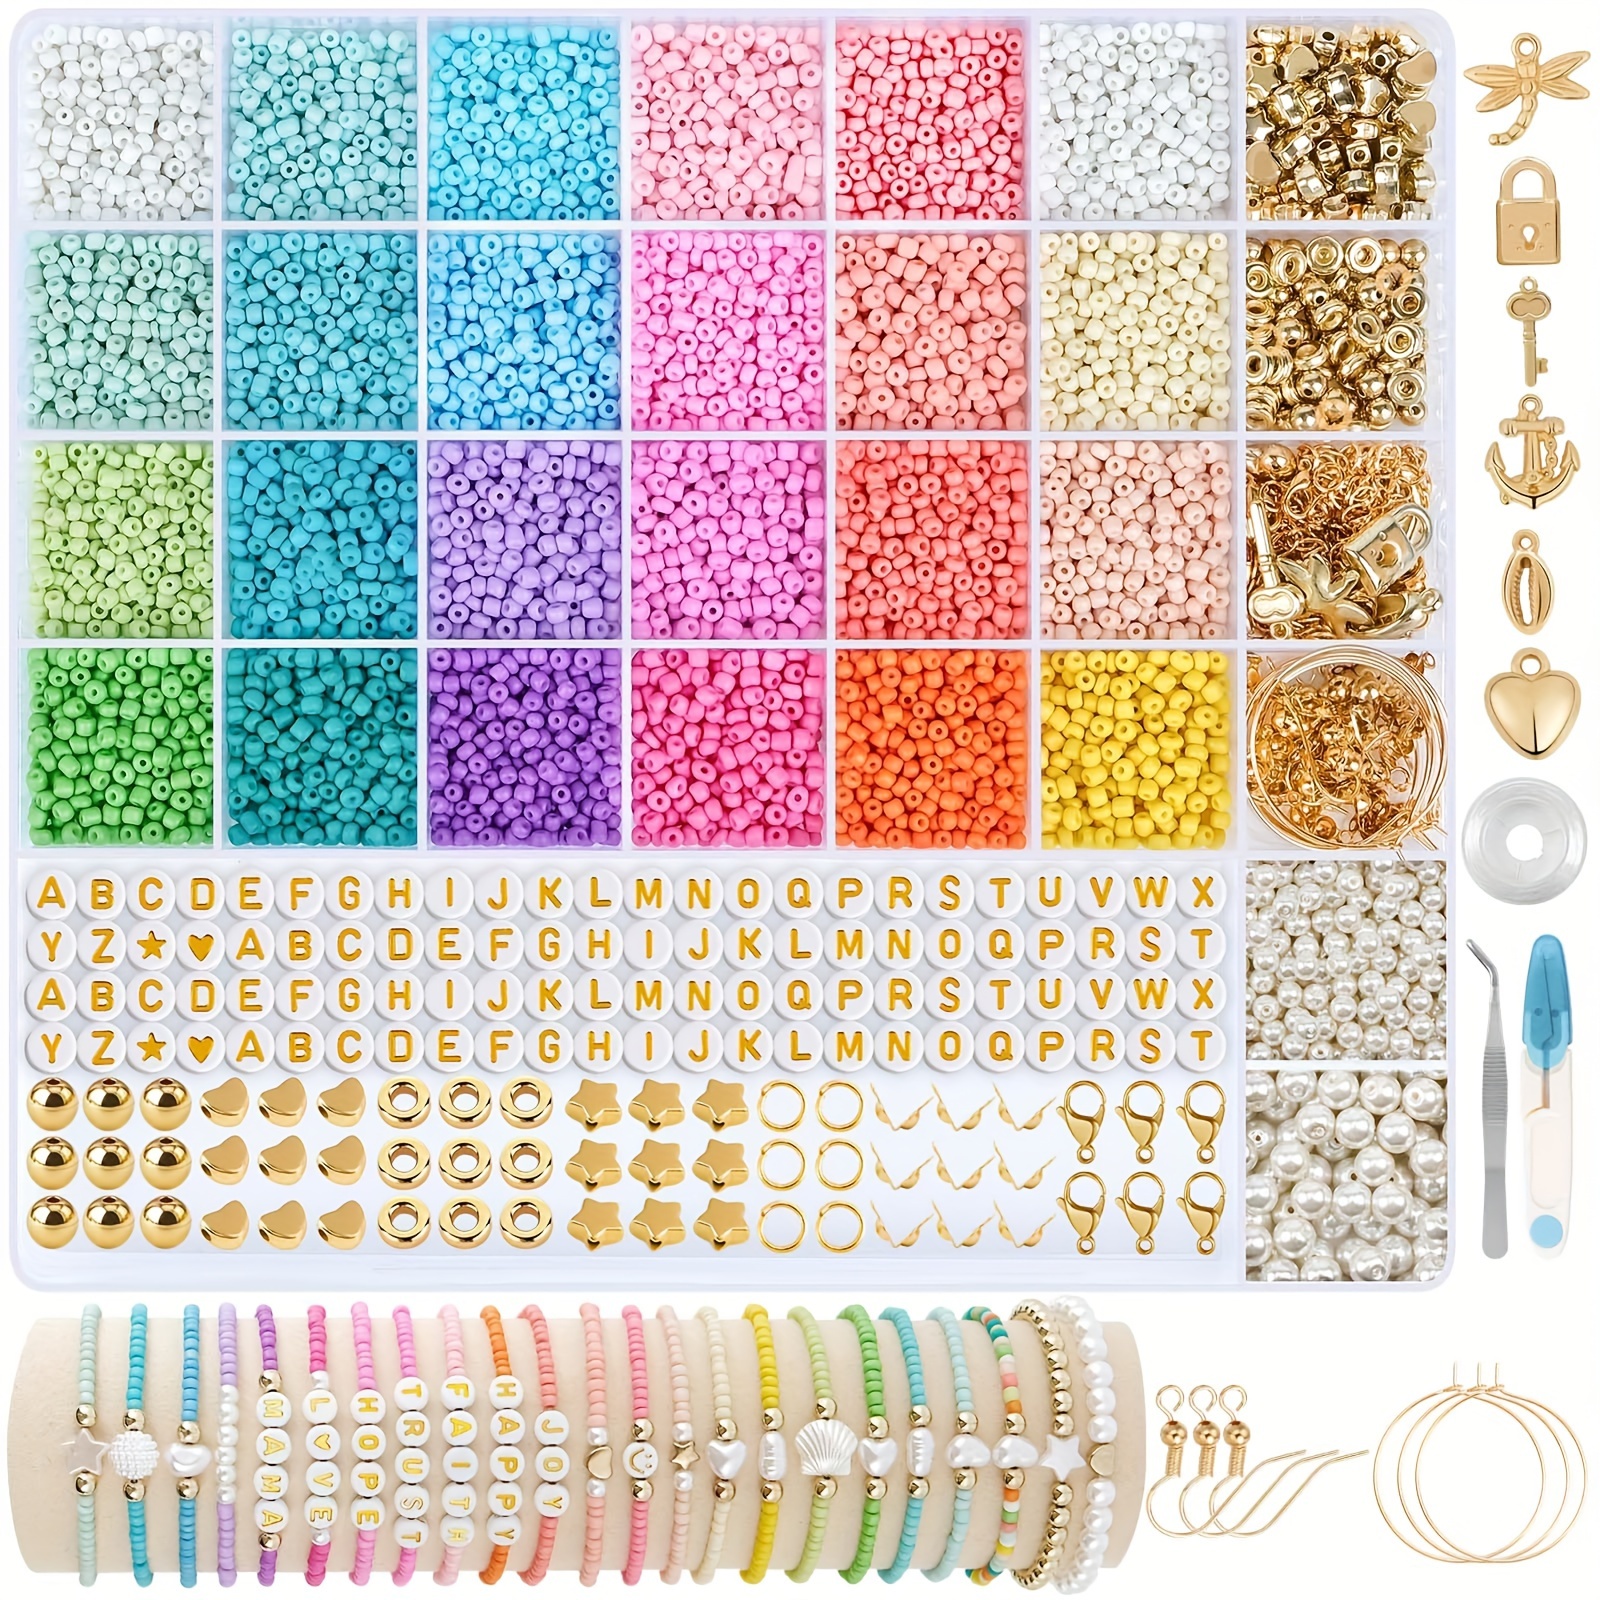 

3mm Macaron Pastel Acrylic Beads - Boho Chic 12,000 Piece Kit With 300 Letter Beads & Accessories, Includes Colorful Storage Box - Perfect For Diy Bracelets & Necklaces